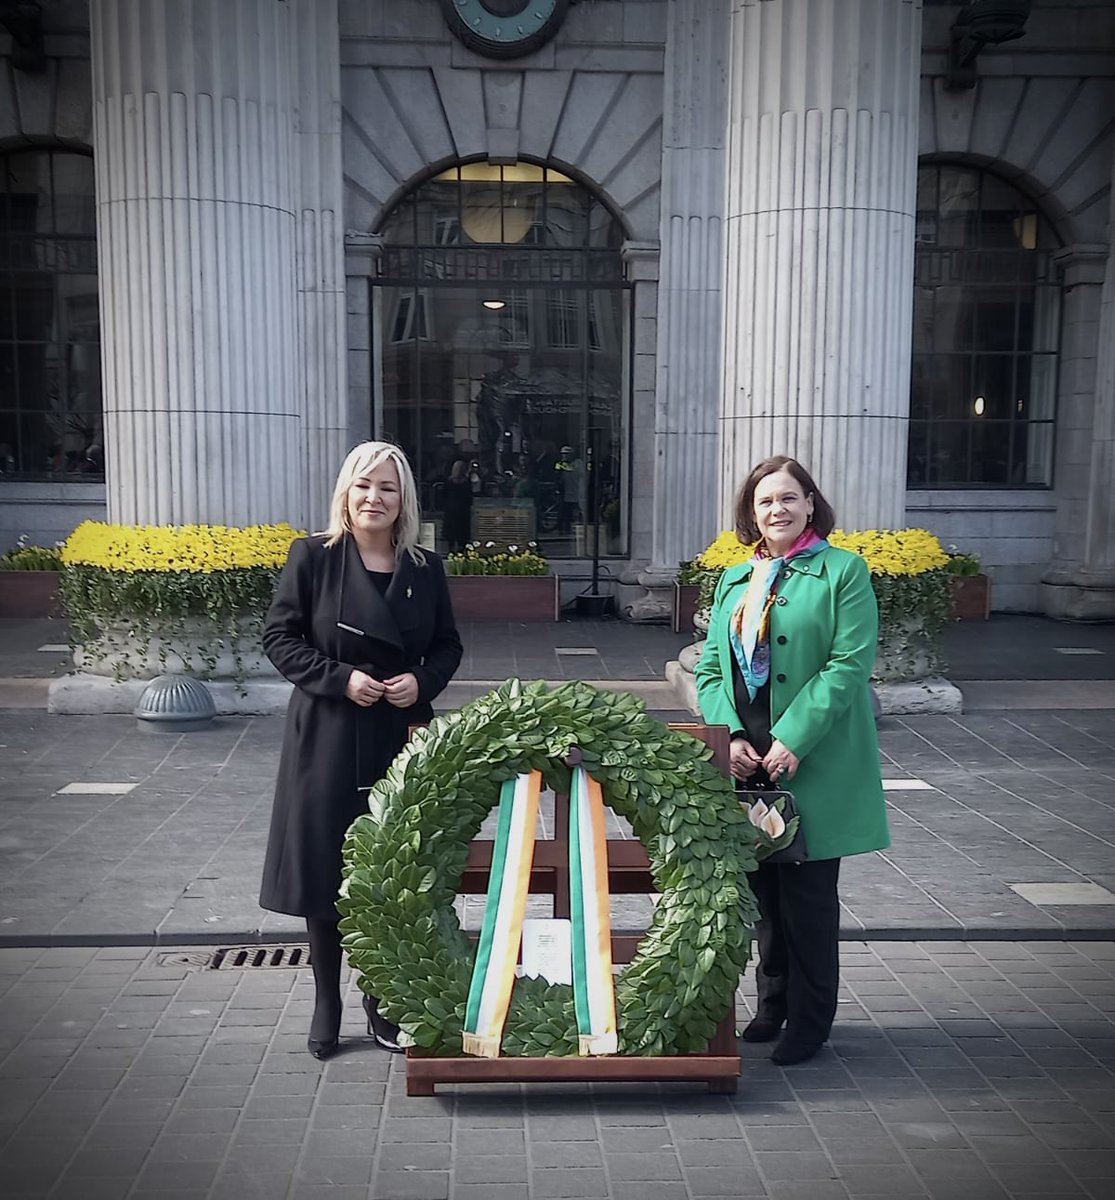 The rebels of 1916 changed the course of history. At Easter, we remember all those courageous patriots who fought to defend the republic proclaimed on the steps of the GPO and we honour those who laid down their lives in pursuit of the freedom and unity of Ireland. 'Life…